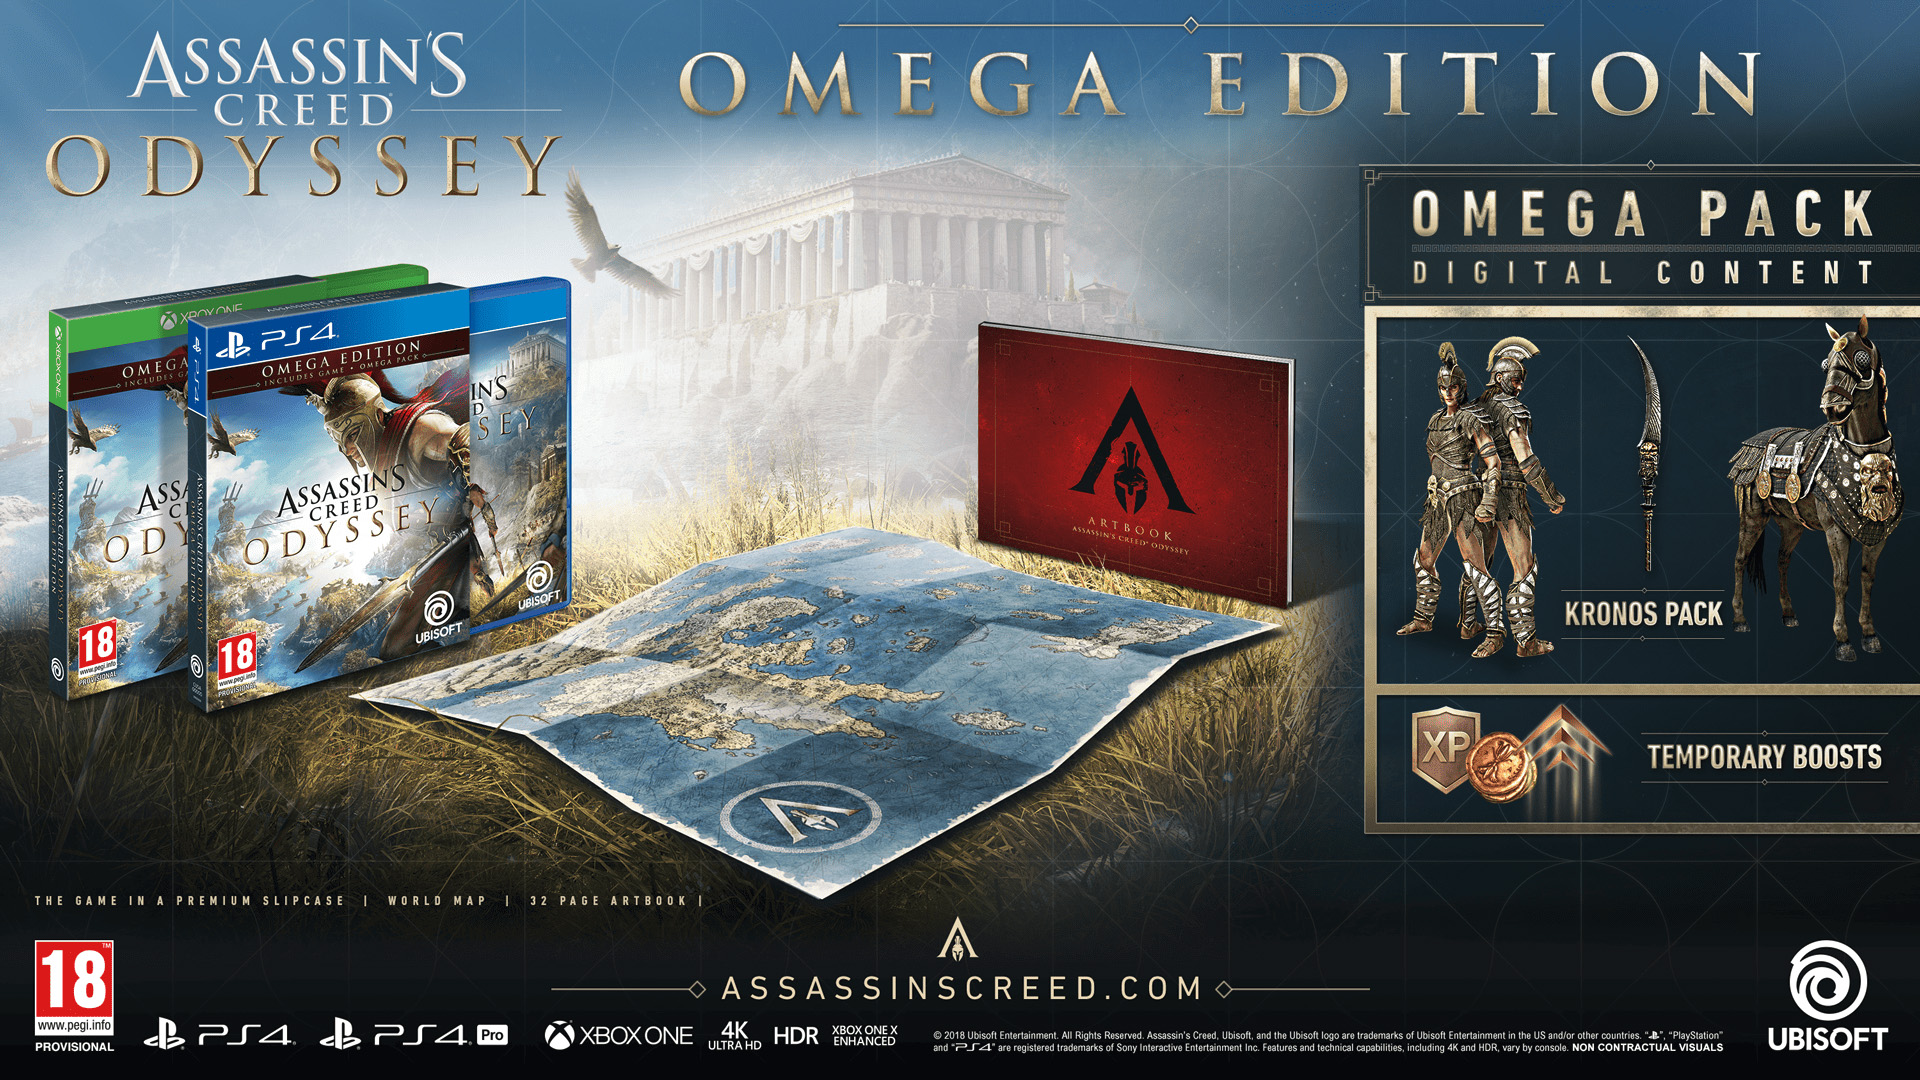 Assassins-Creed-Odyssey-Omega-Edition-Cont